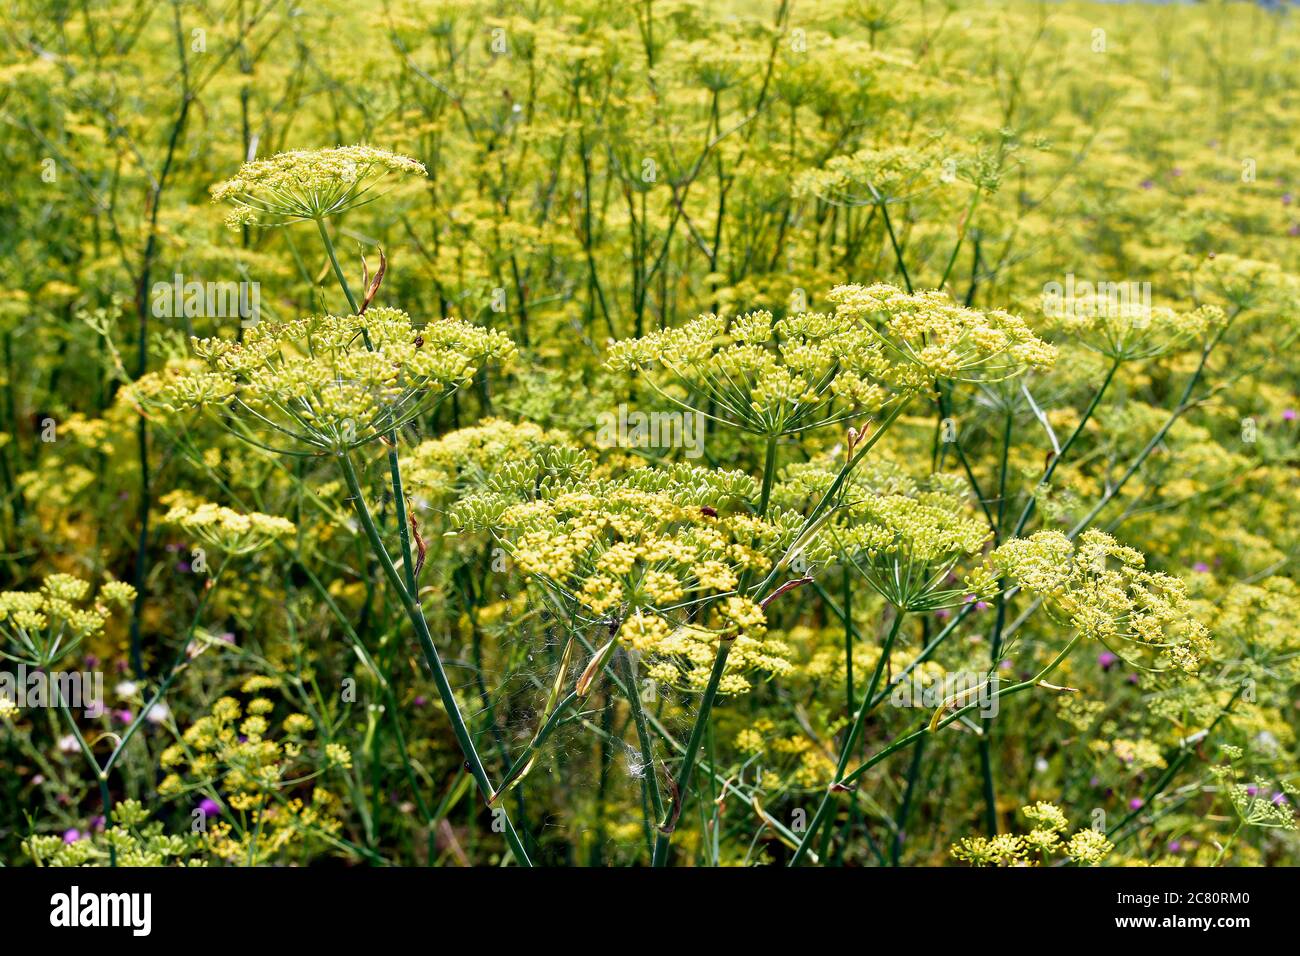 Austria, filed with common caraway Stock Photo